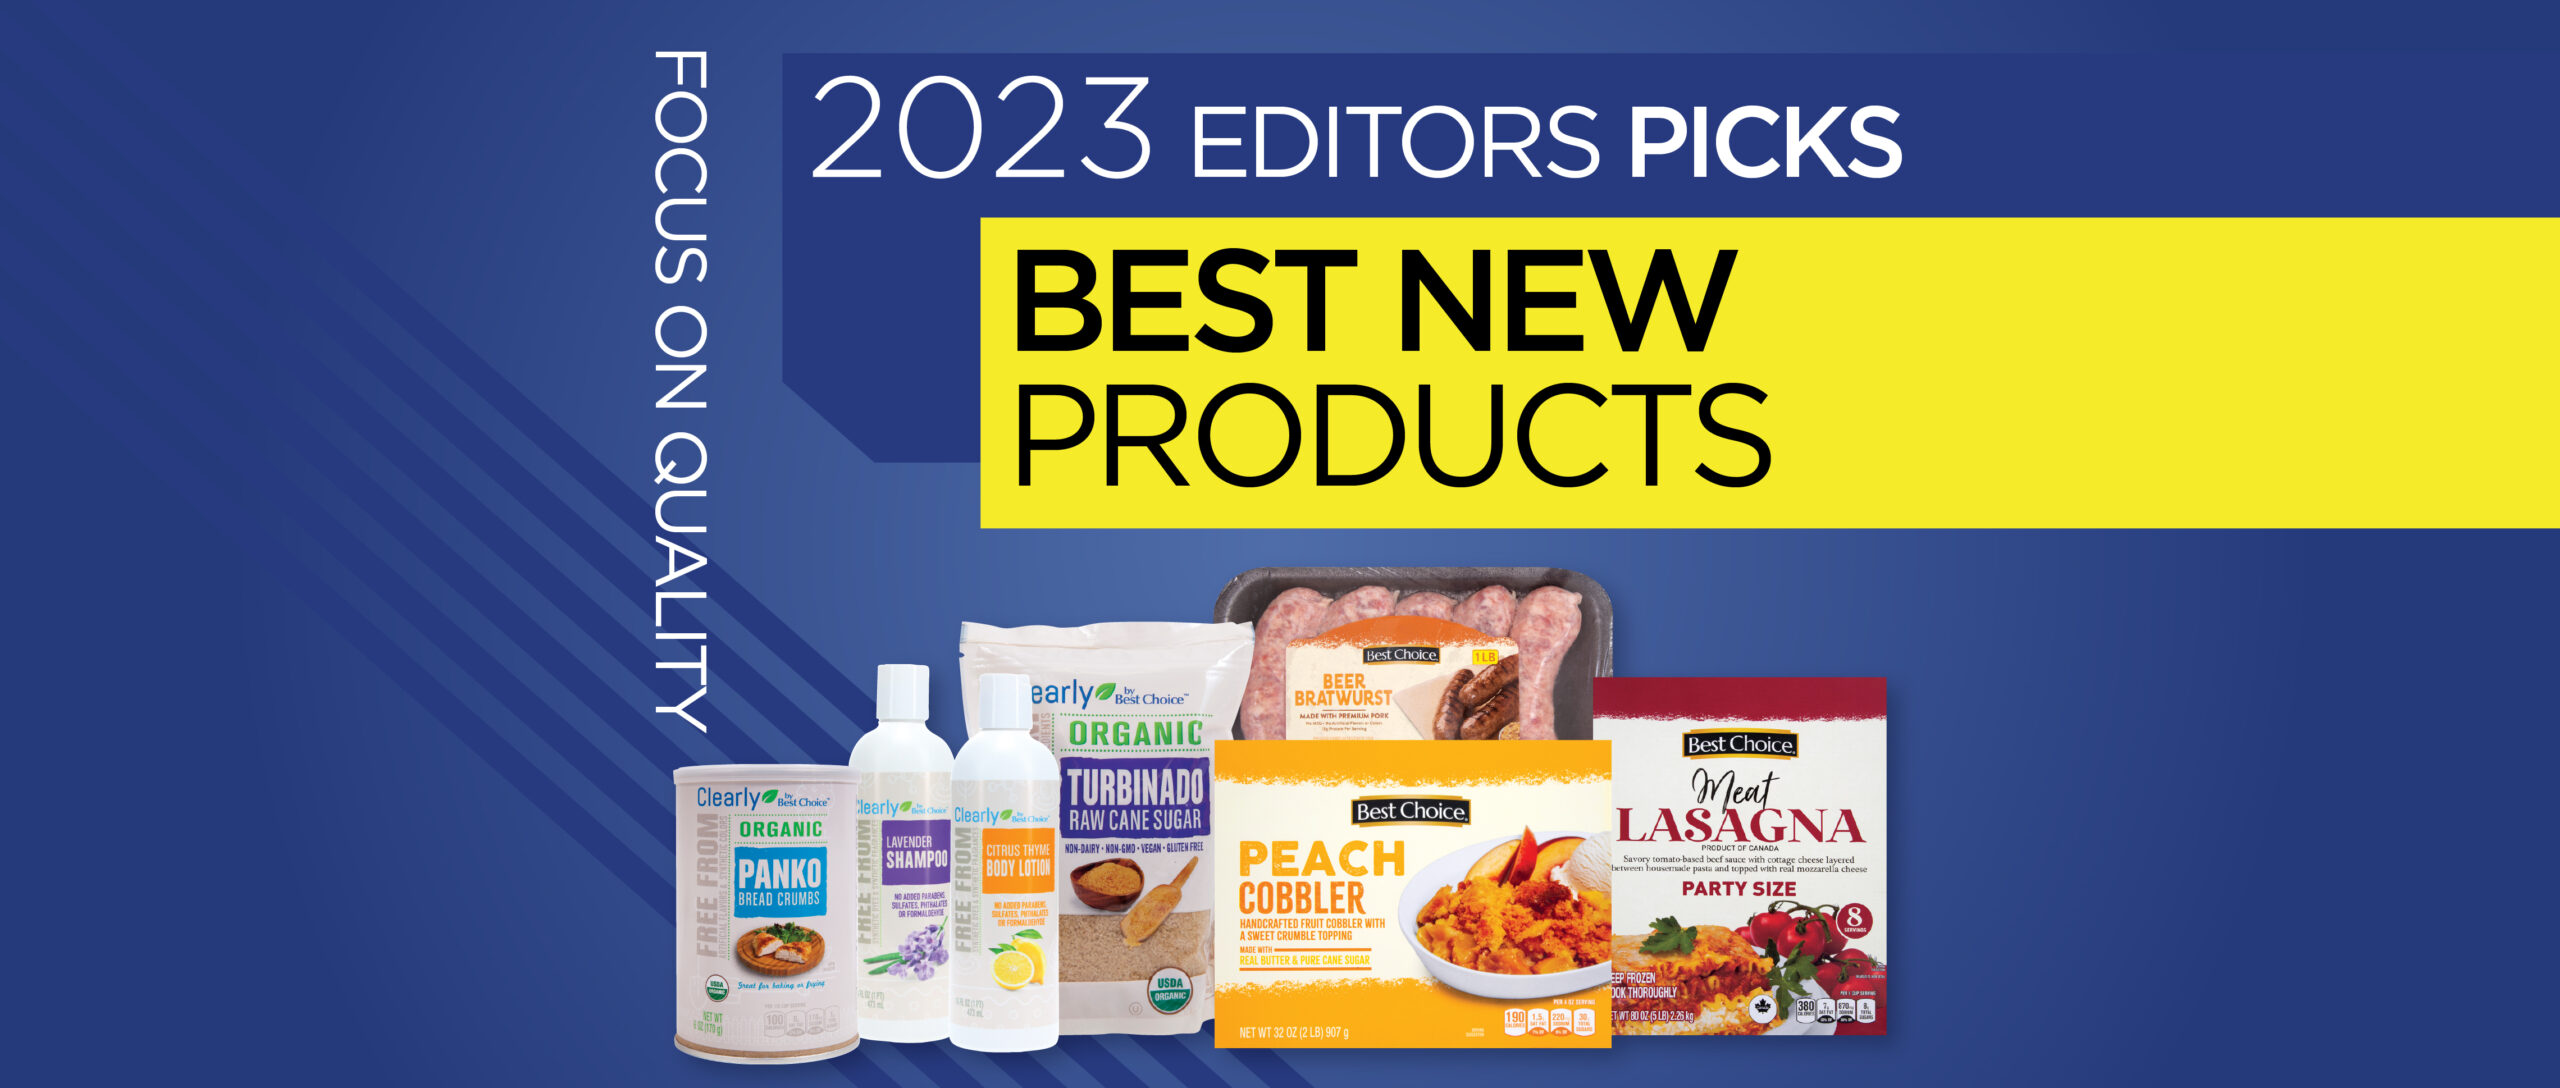 Best New Product Awards 2023